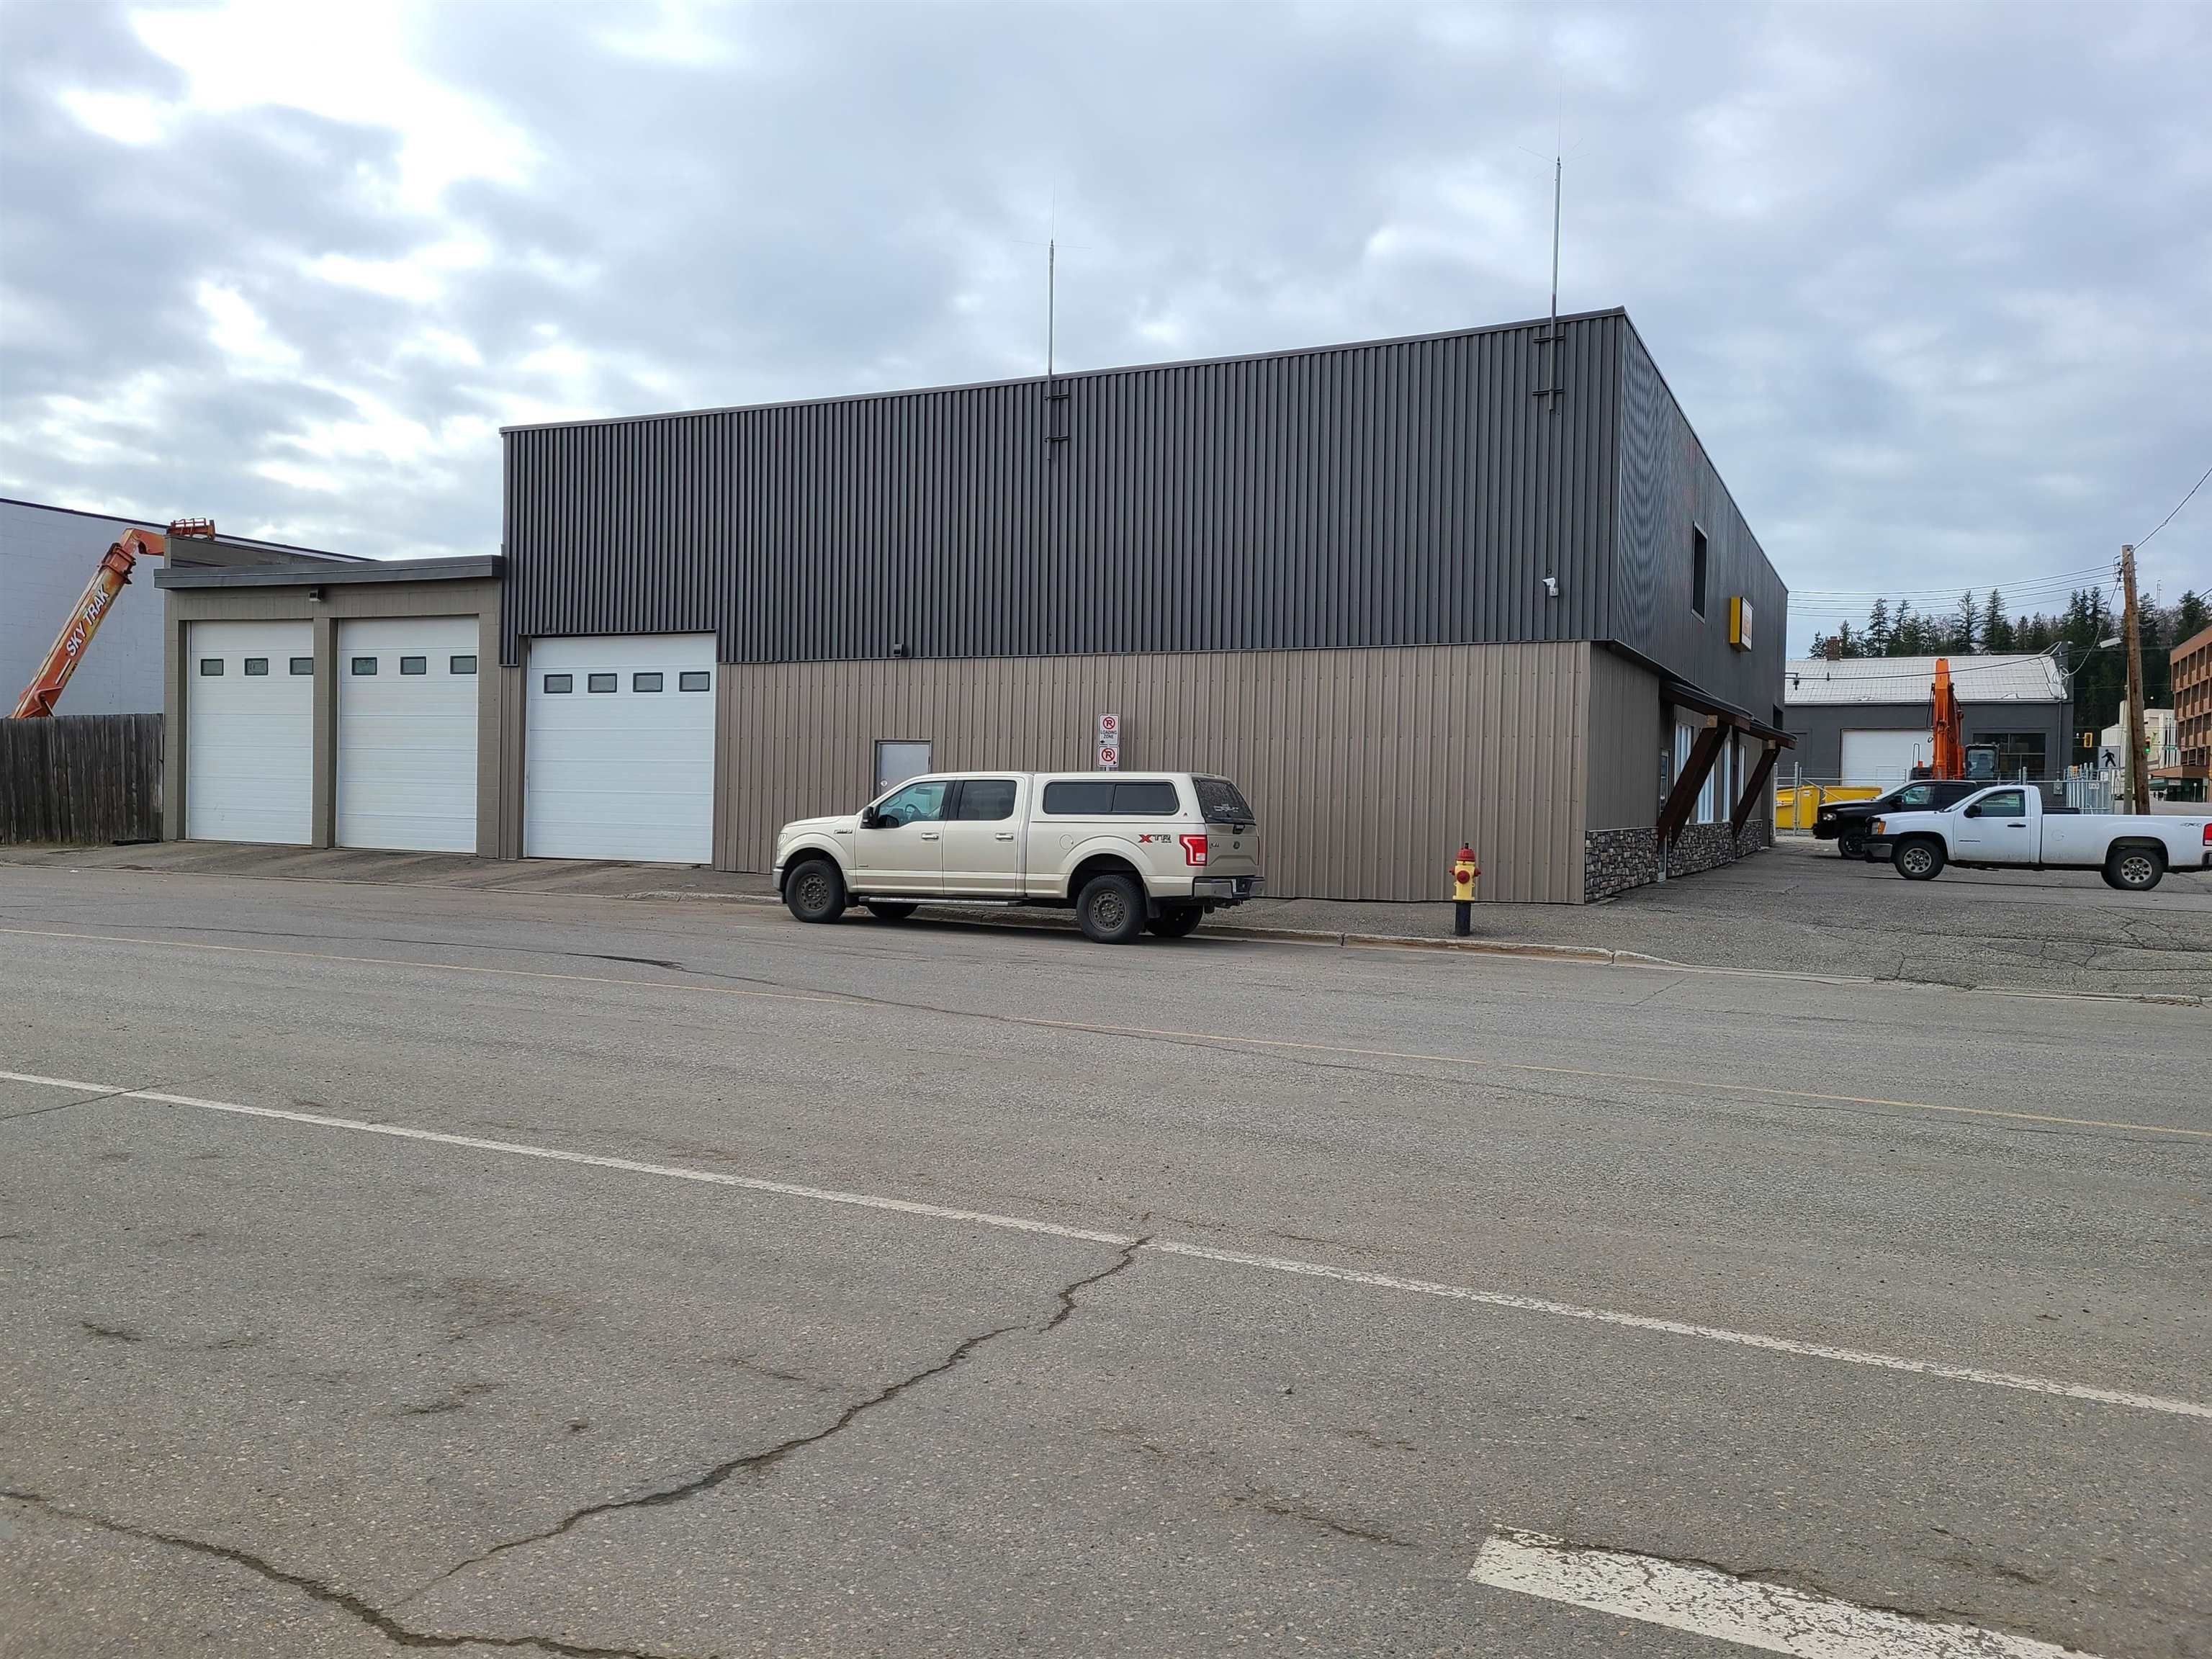 Main Photo: 220 QUEENSWAY in Prince George: East End Industrial for lease (PG City Central)  : MLS®# C8051352